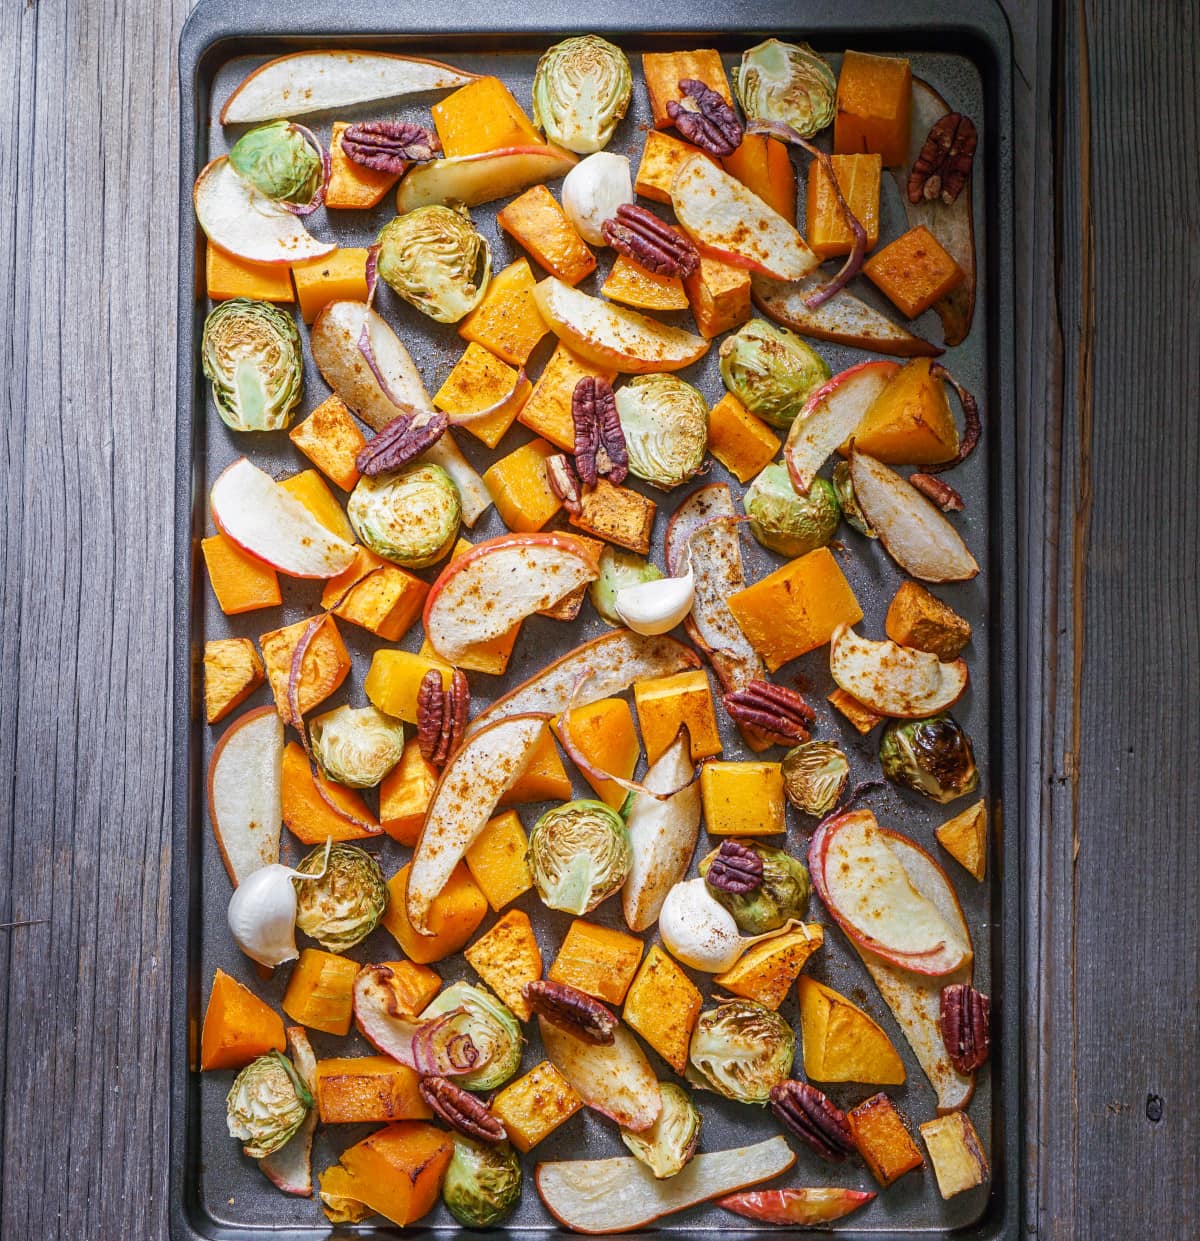 Roasted vegetables on a baking sheet: sweet potato, butternut squash, brussels sprouts, apple, pecans and pear.